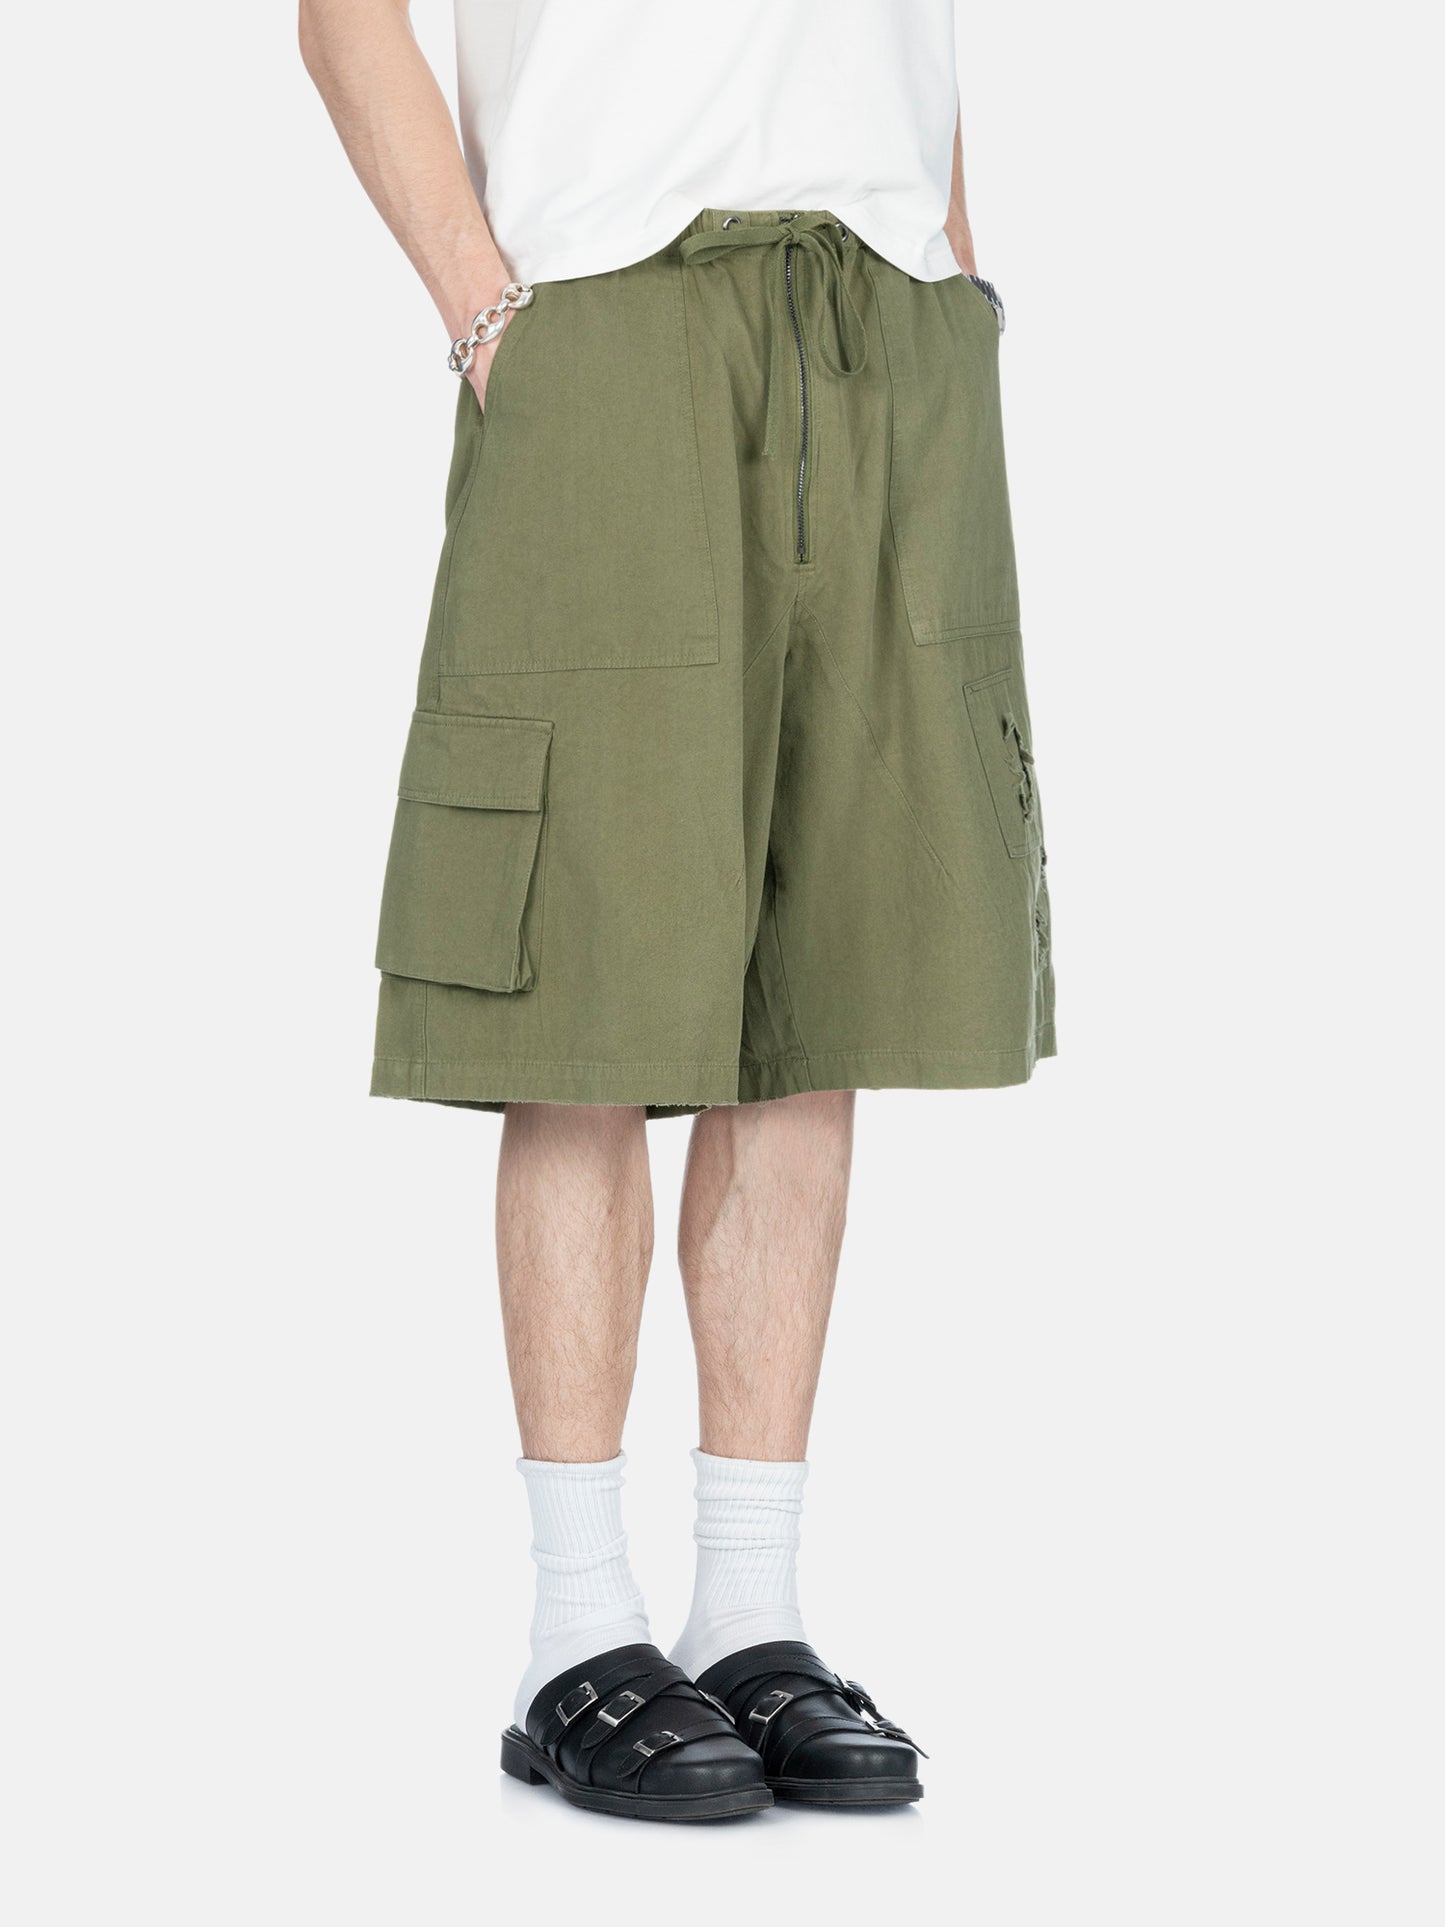 OLIVE GREEN DISTRESSED CARGO SHORTS